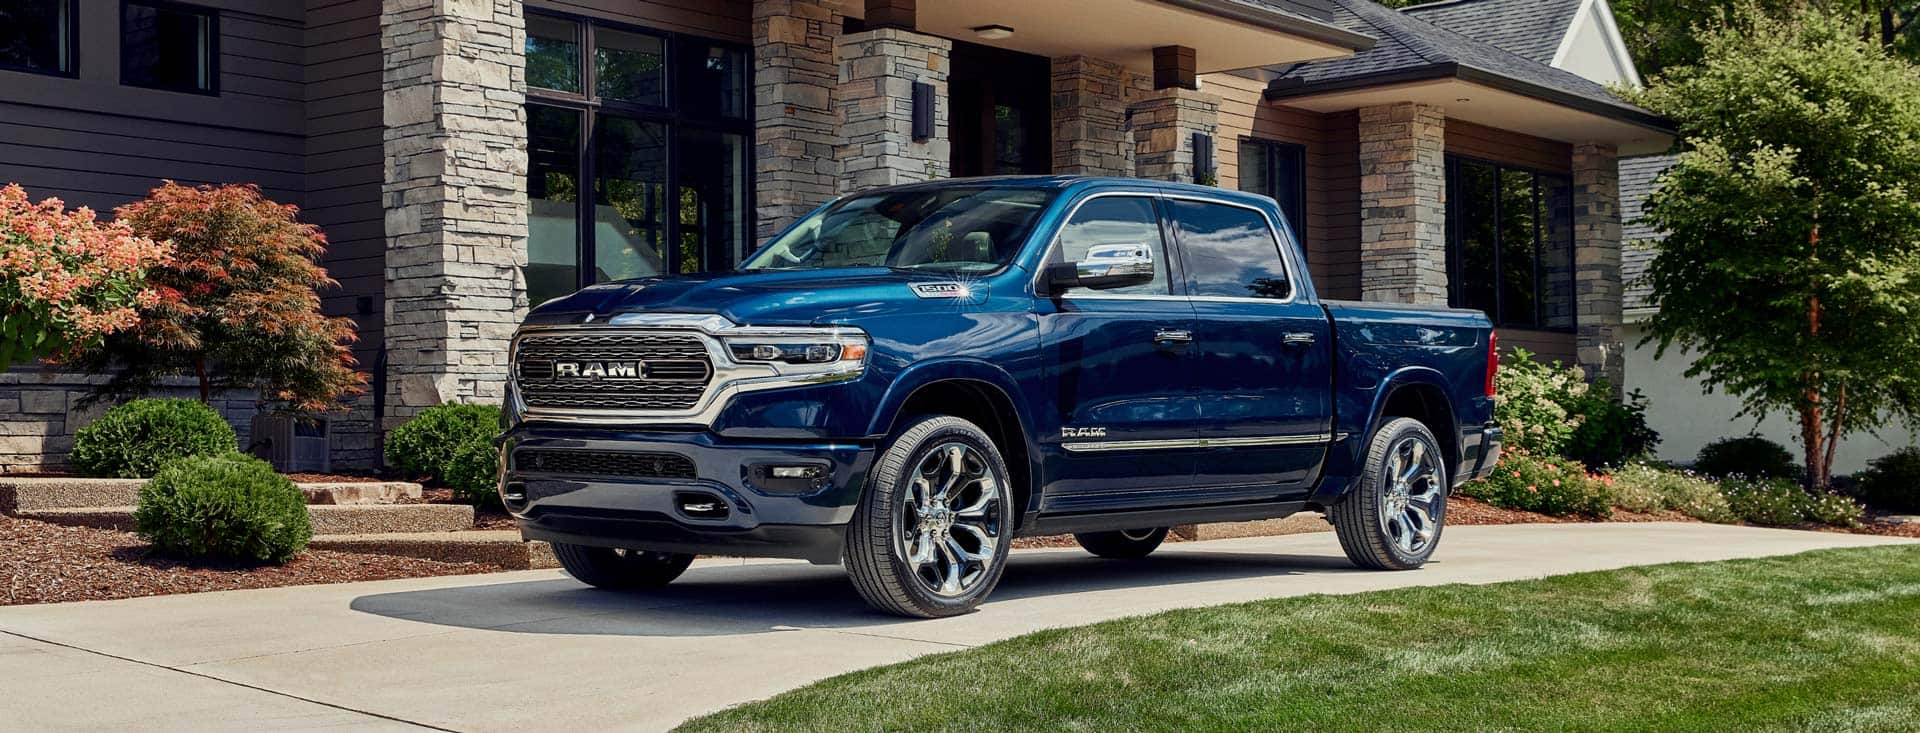 The 2022 Ram 1500 Limited 10th Anniversary Edition in Patriot Blue Pearl Coat, parked in a driveway outside a large house.